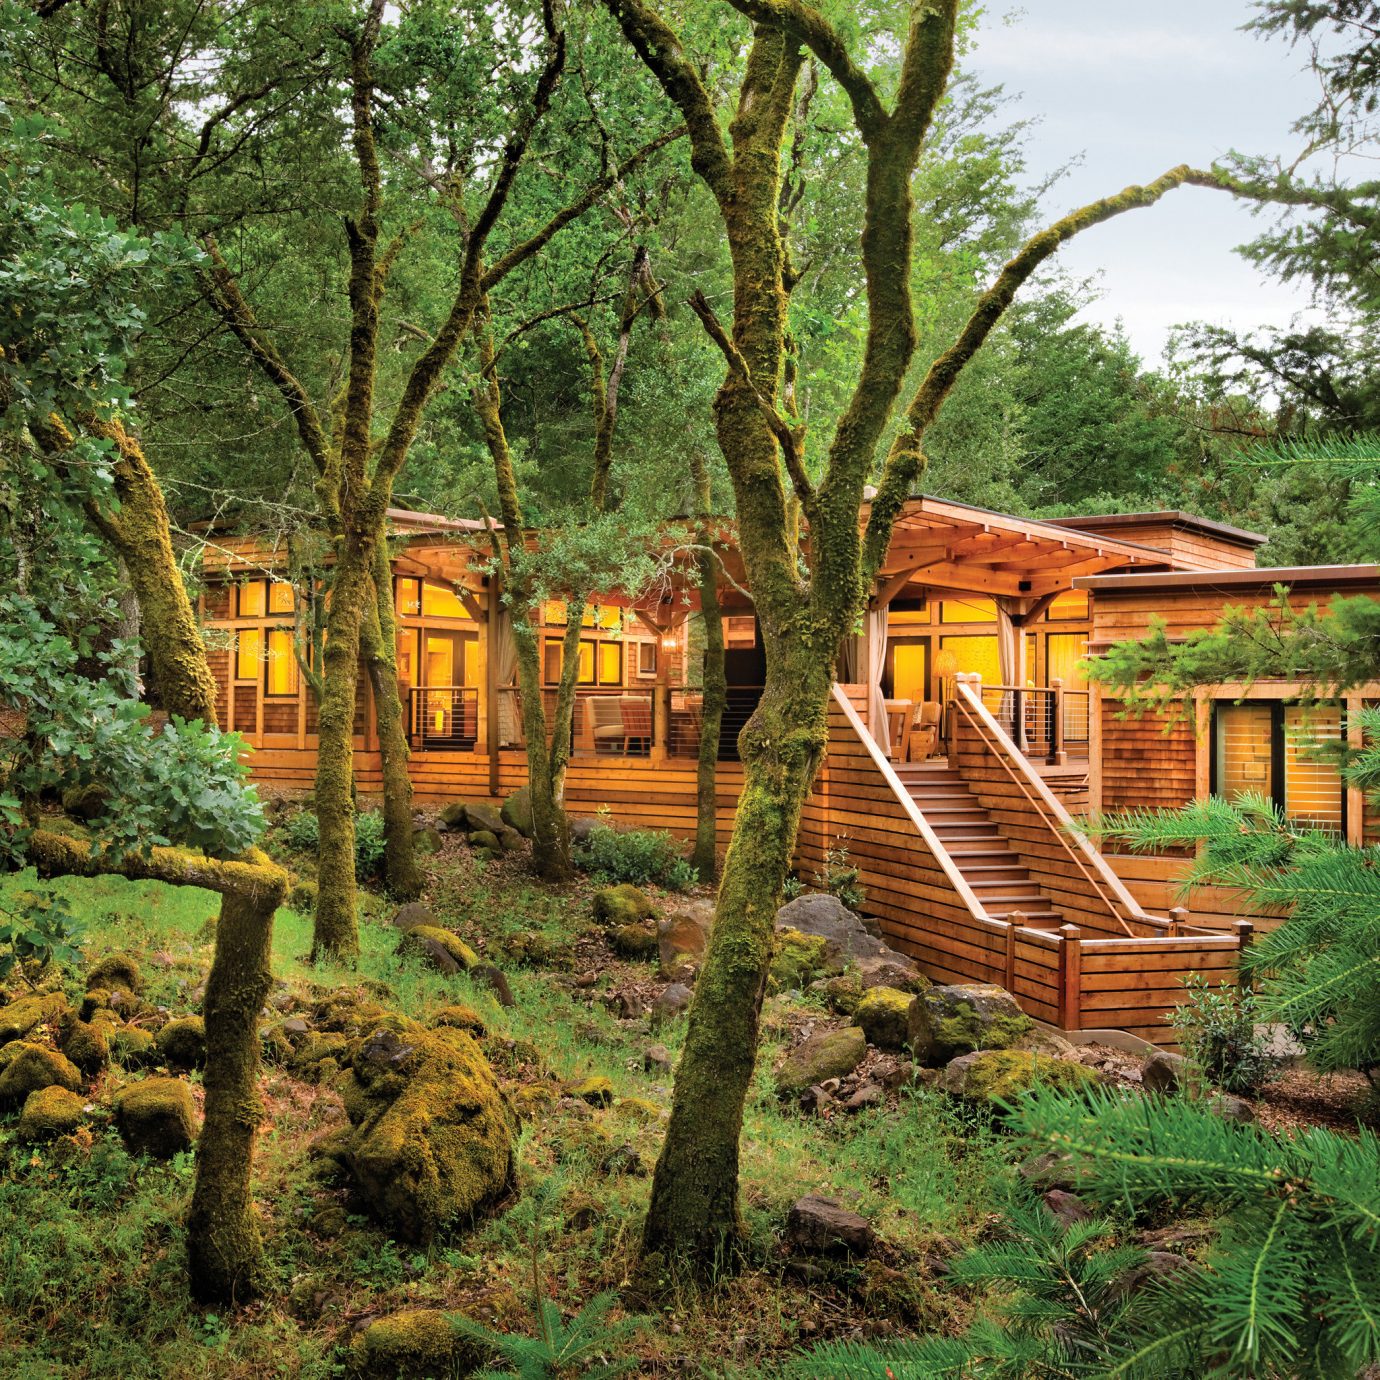 Eco Exterior Food + Drink Health + Wellness Hotels Luxury Outdoors Ranch Romance Romantic Rustic Spa Retreats Trip Ideas Wellness tree grass park Forest plant Jungle rural area log cabin woodland hut Garden outdoor structure rainforest lush wooded surrounded shade